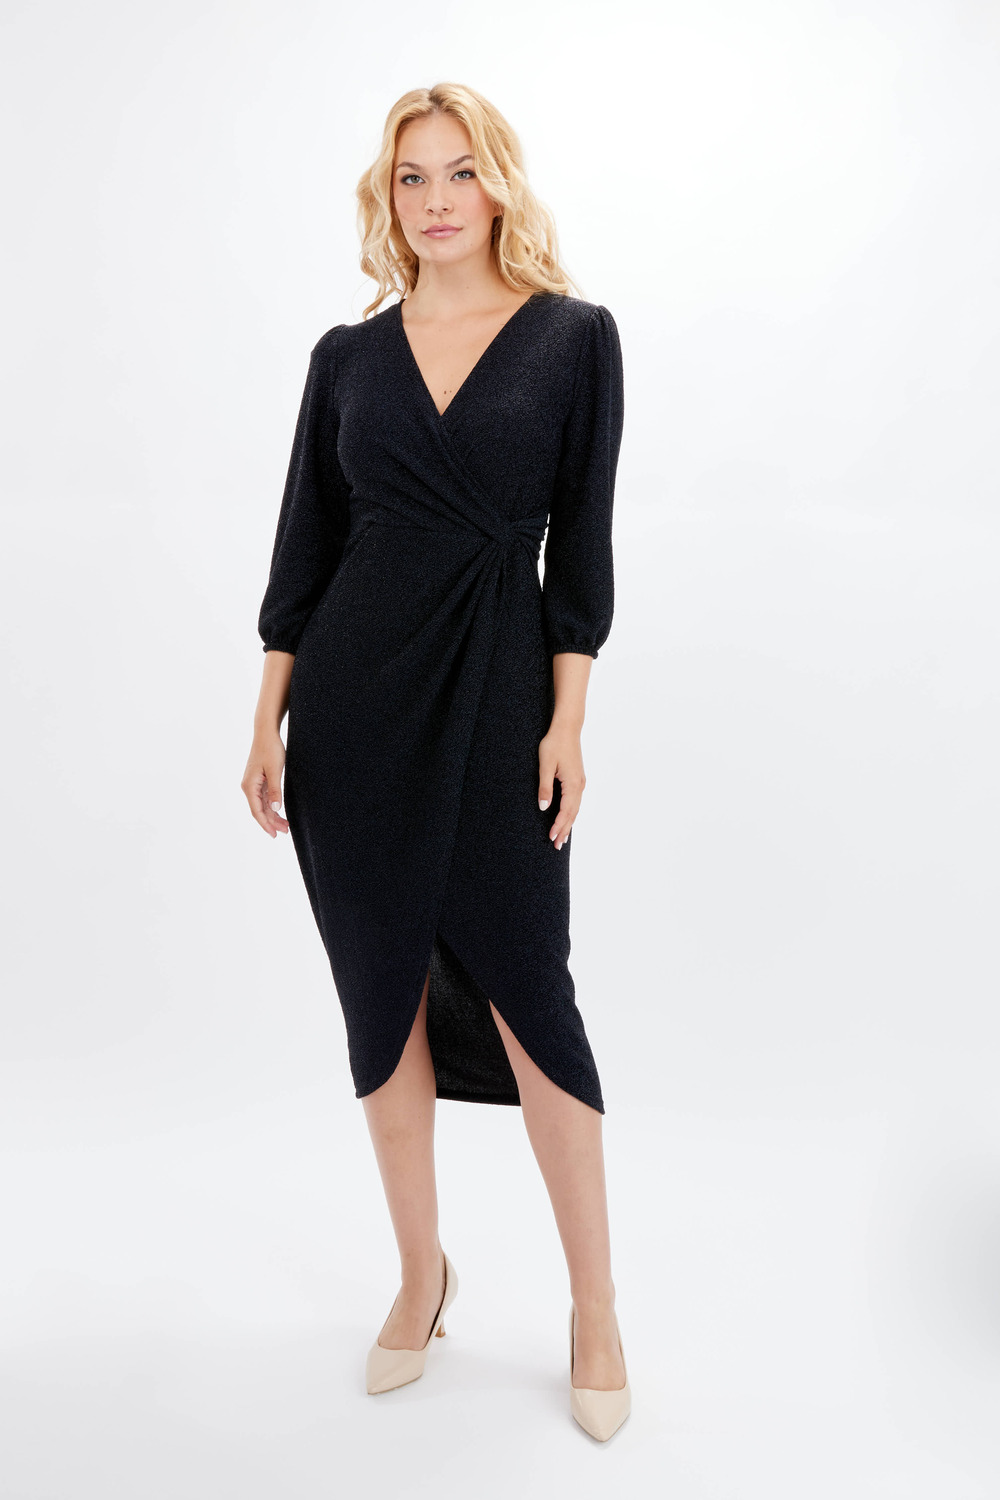 Wrap Front Shimmer Dress Style 234413. Navy/black